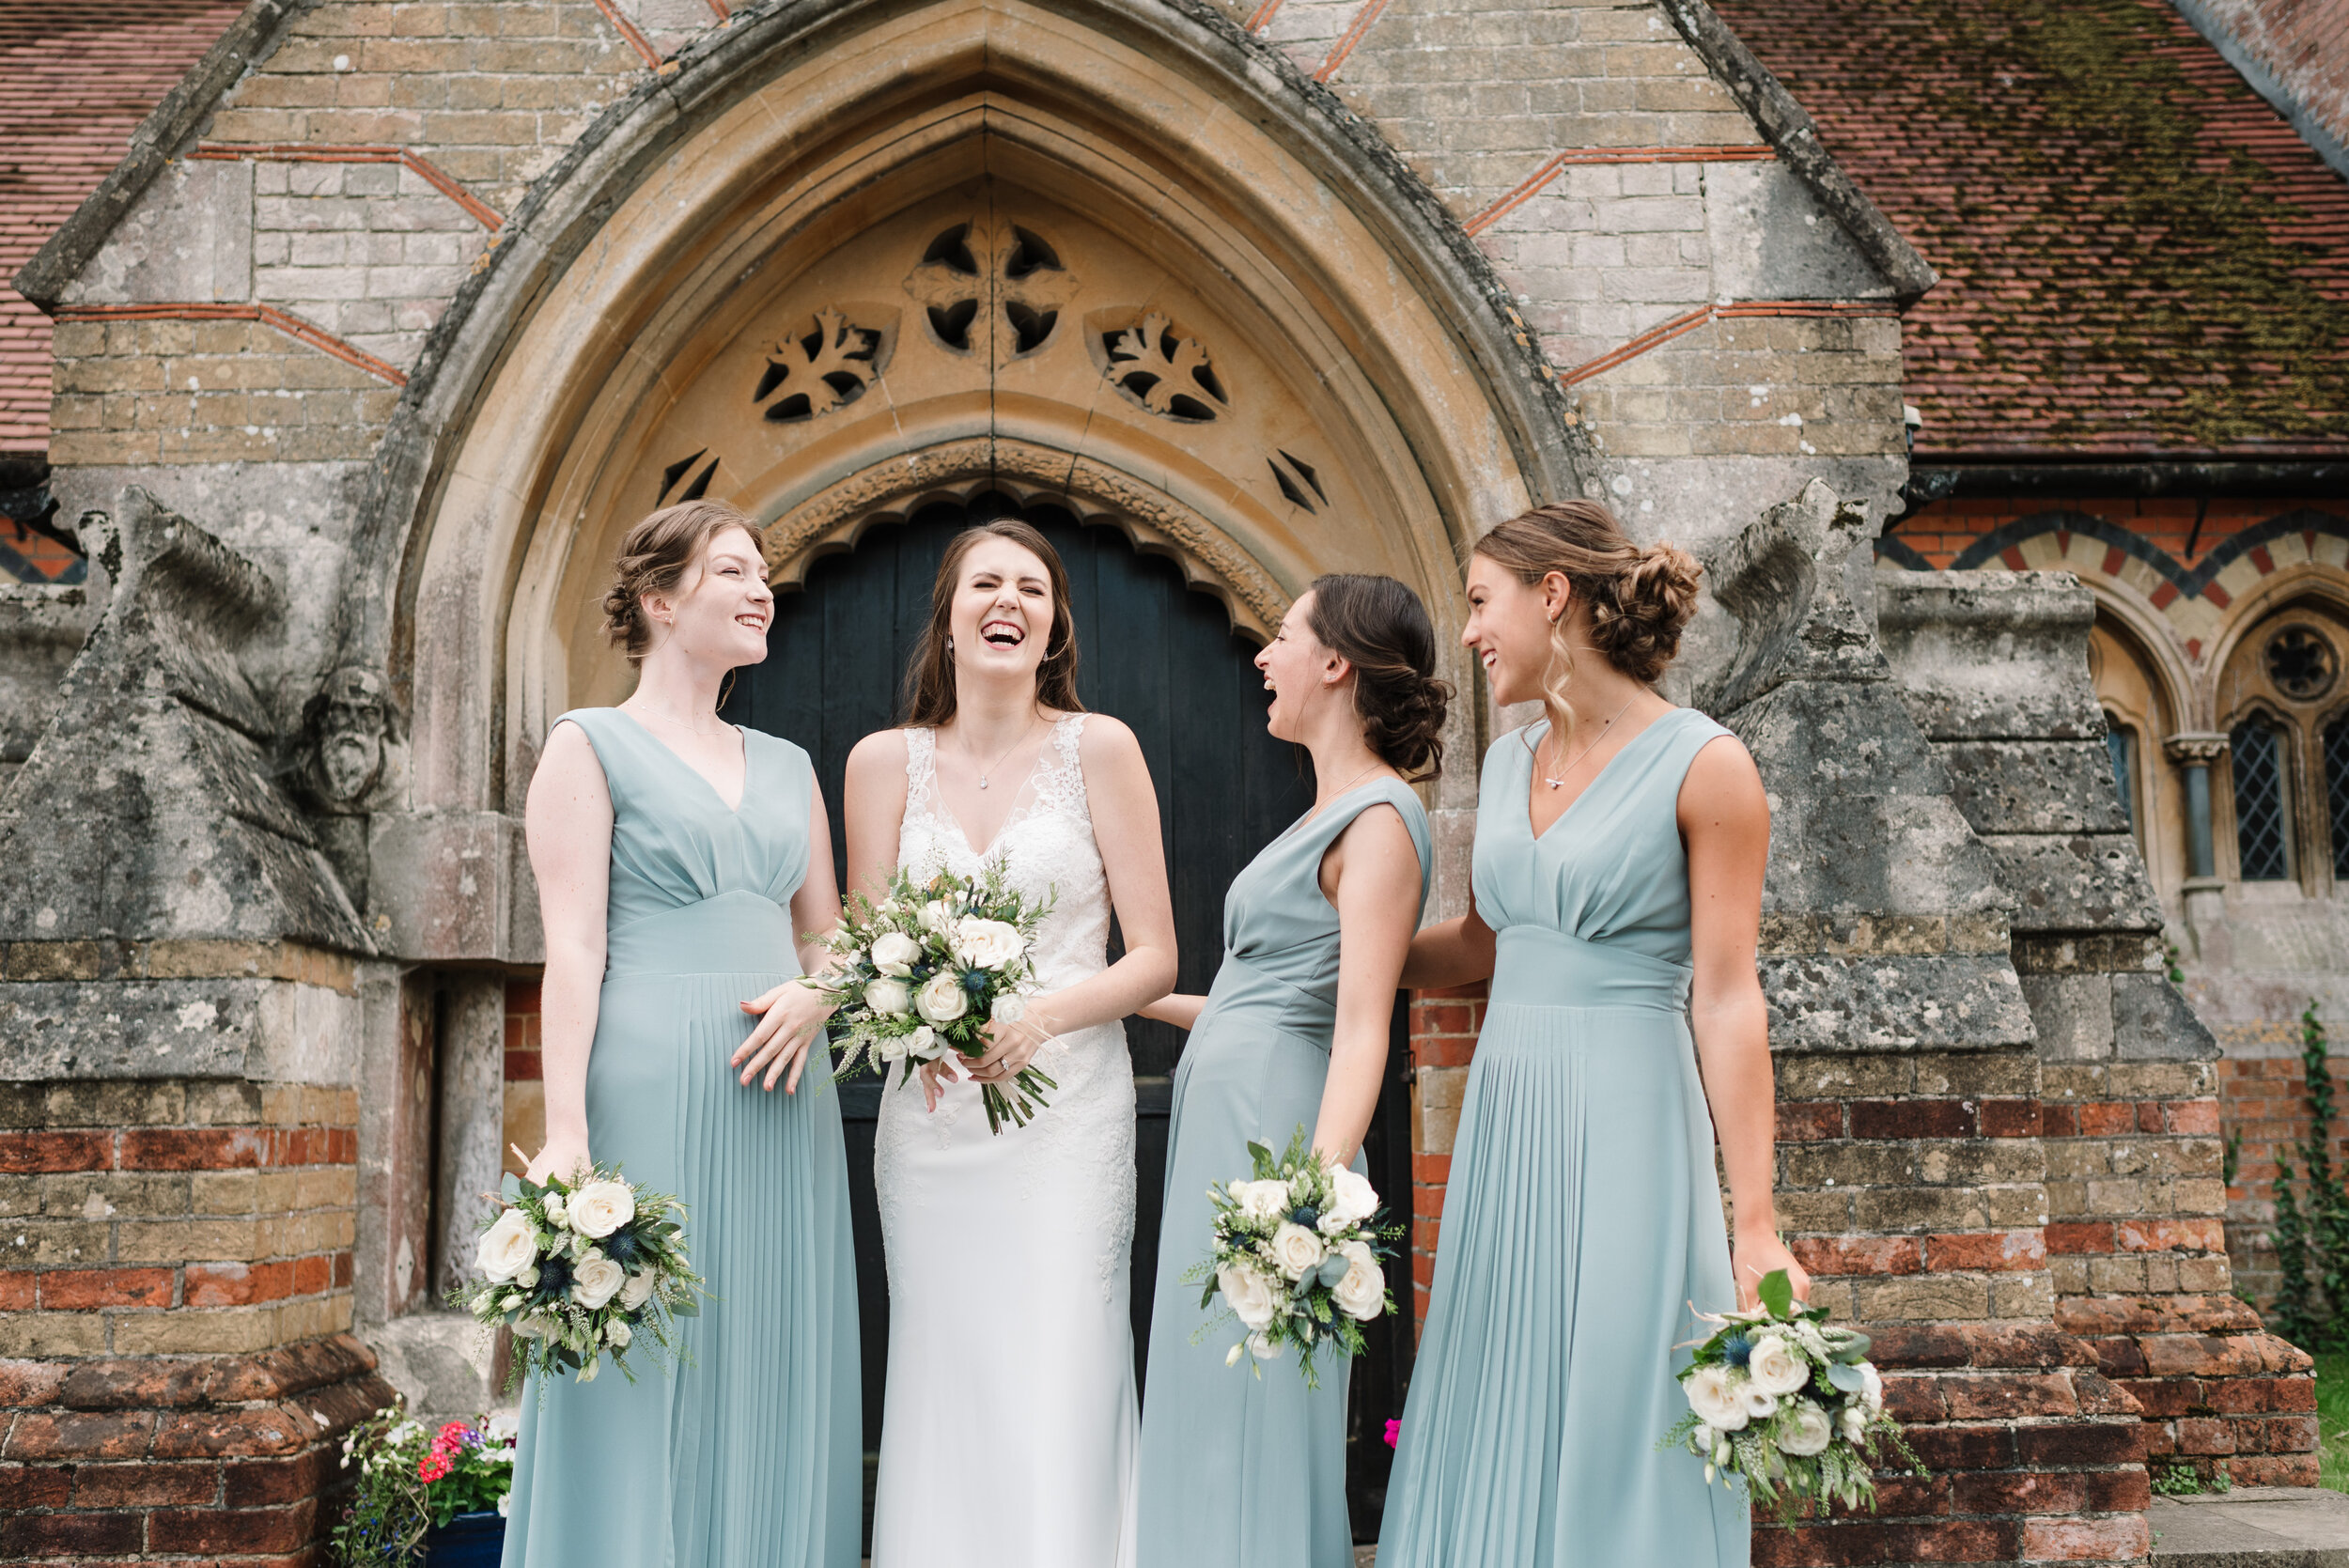 Bride and three bridesmaids laughing outside church